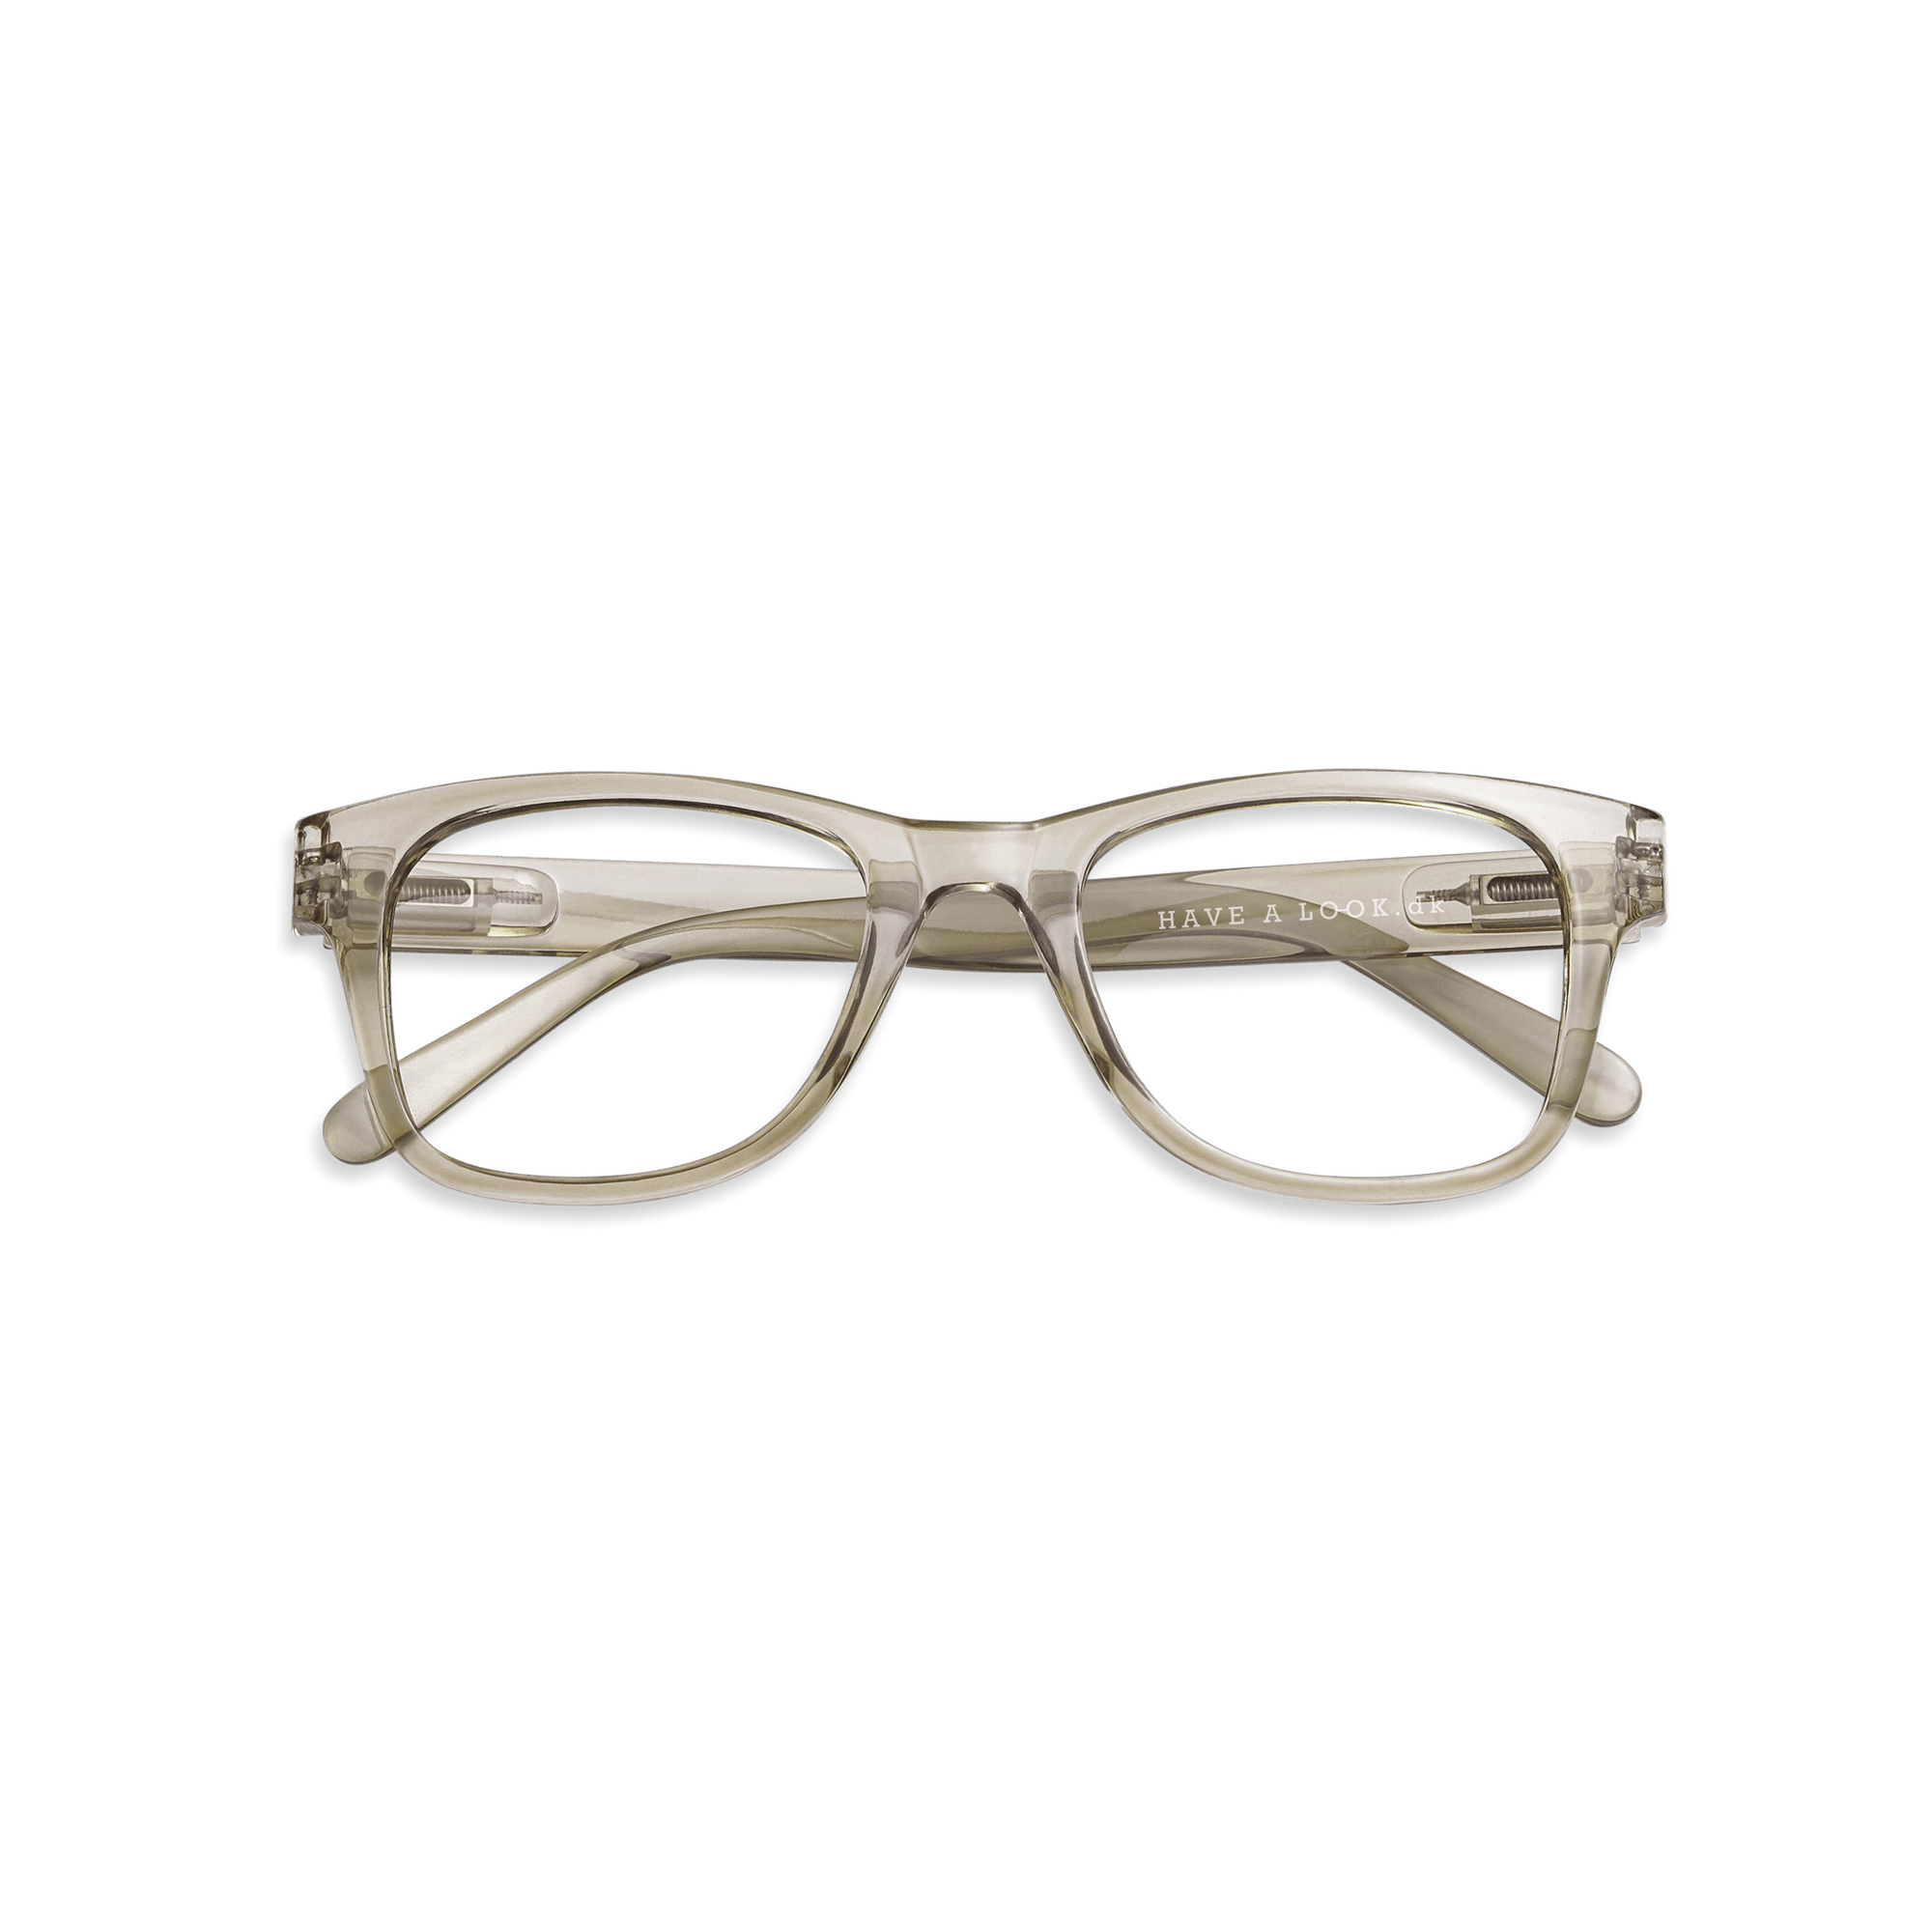 Clear lens glasses Type B - olive